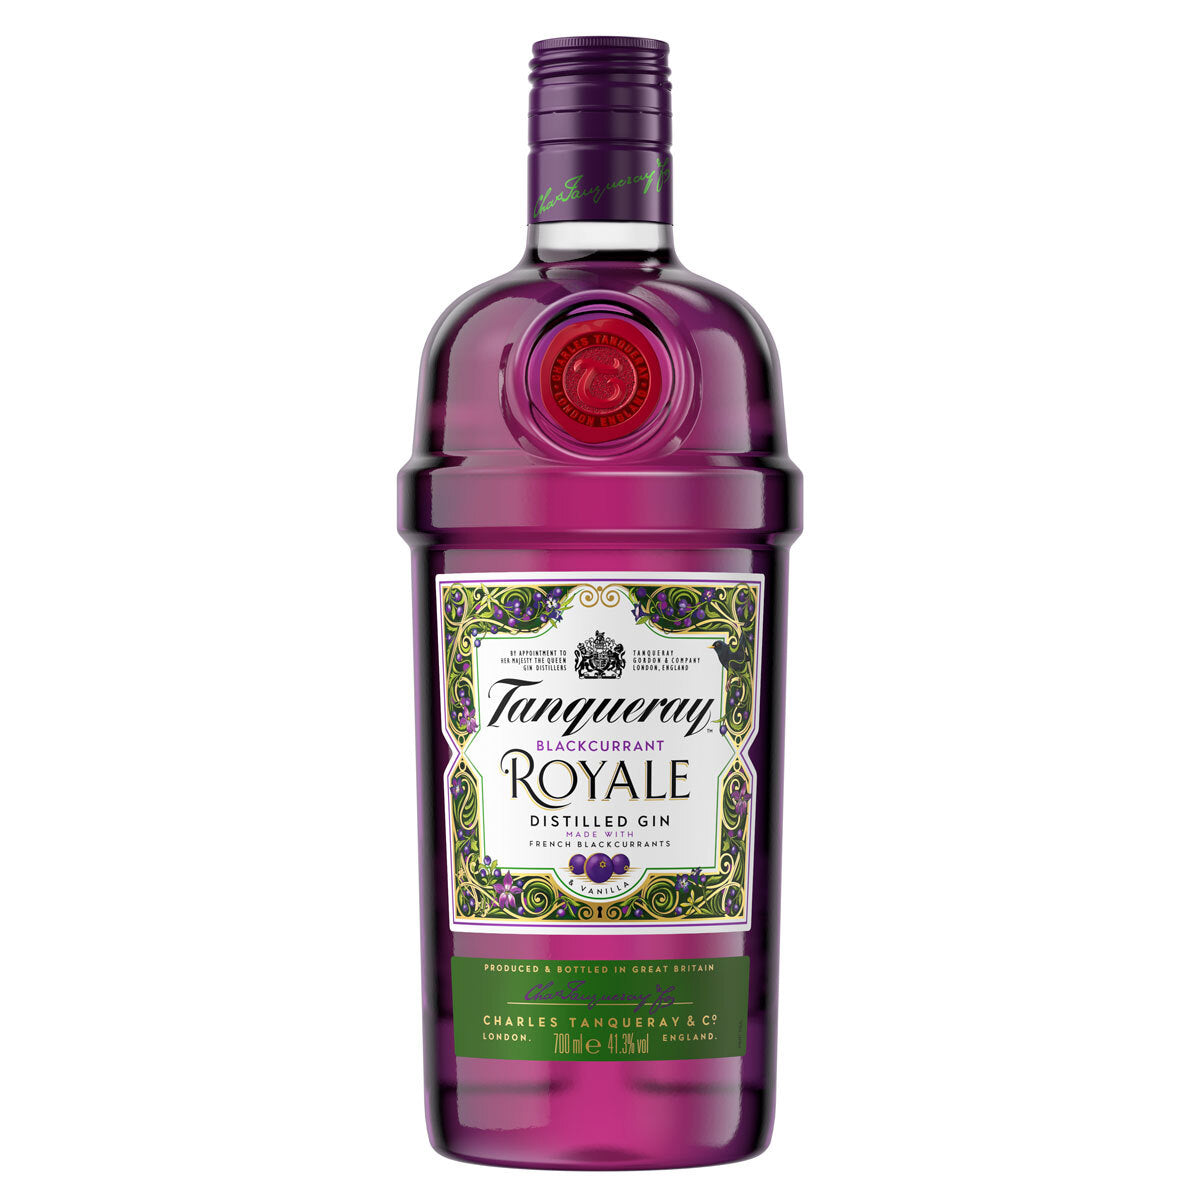 Tanqueray Blackcurrant Royale Gin 70cl Spirits Costco UK   